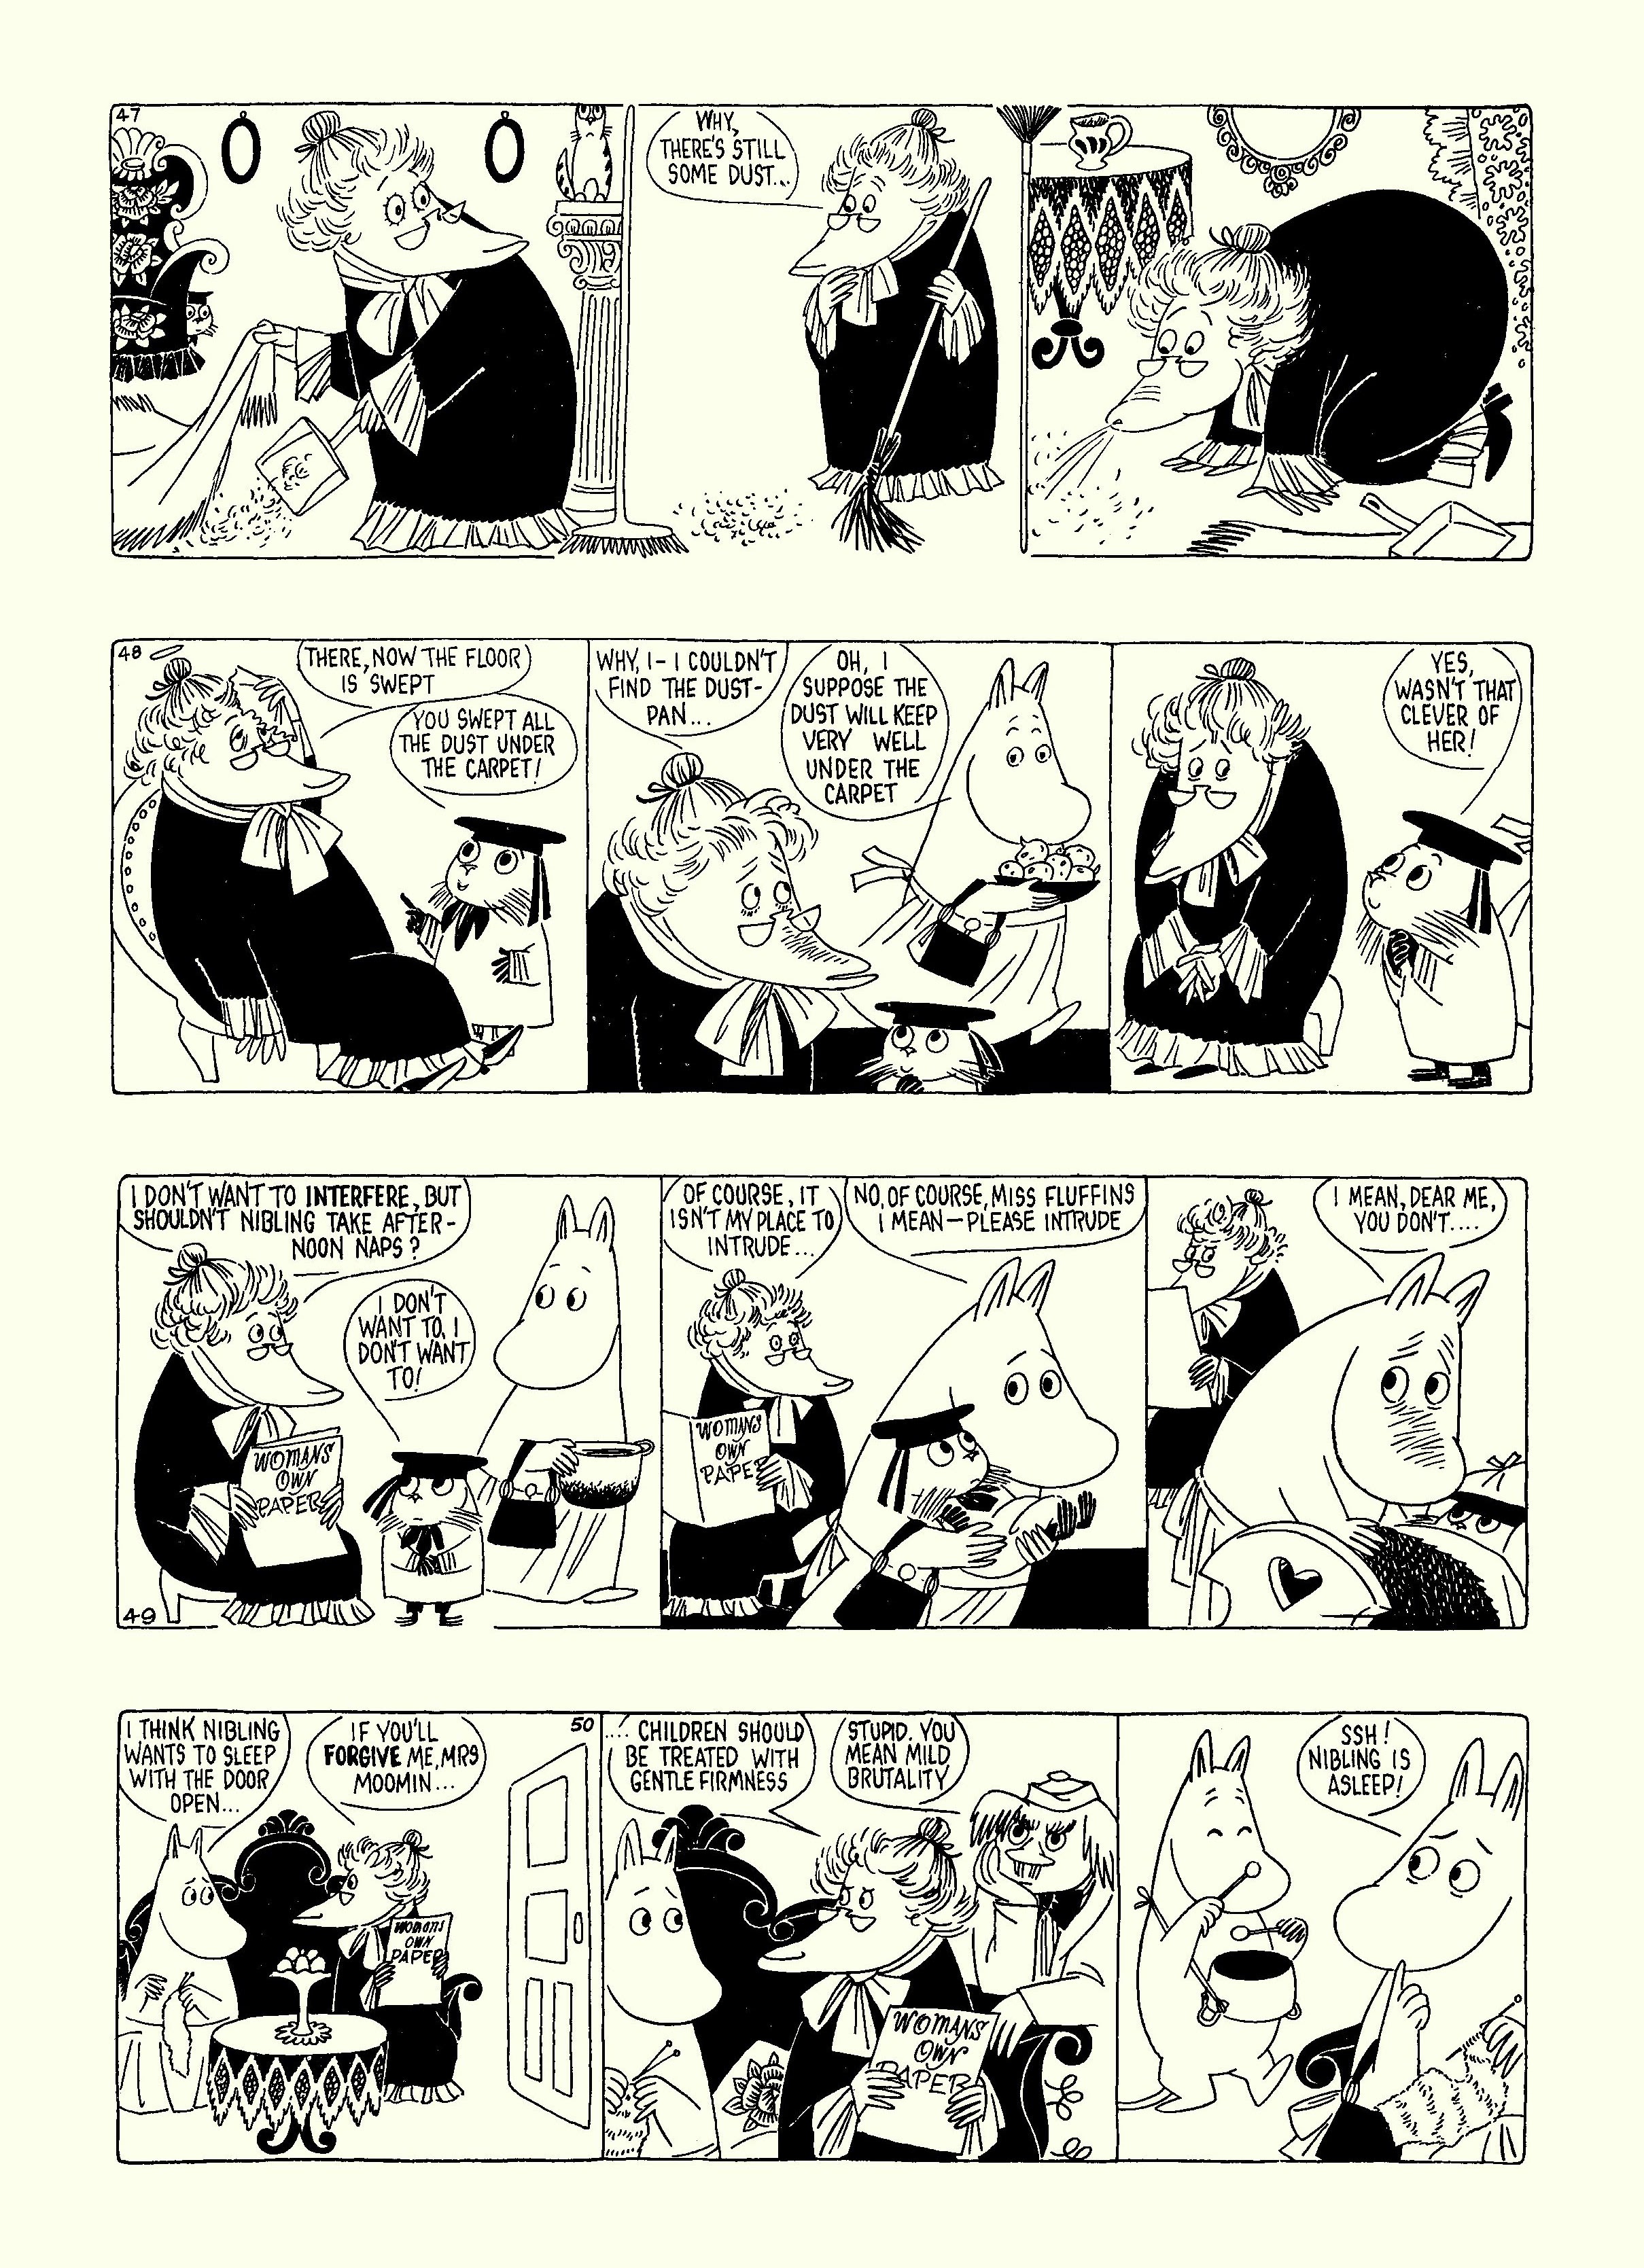 Read online Moomin: The Complete Tove Jansson Comic Strip comic -  Issue # TPB 5 - 18